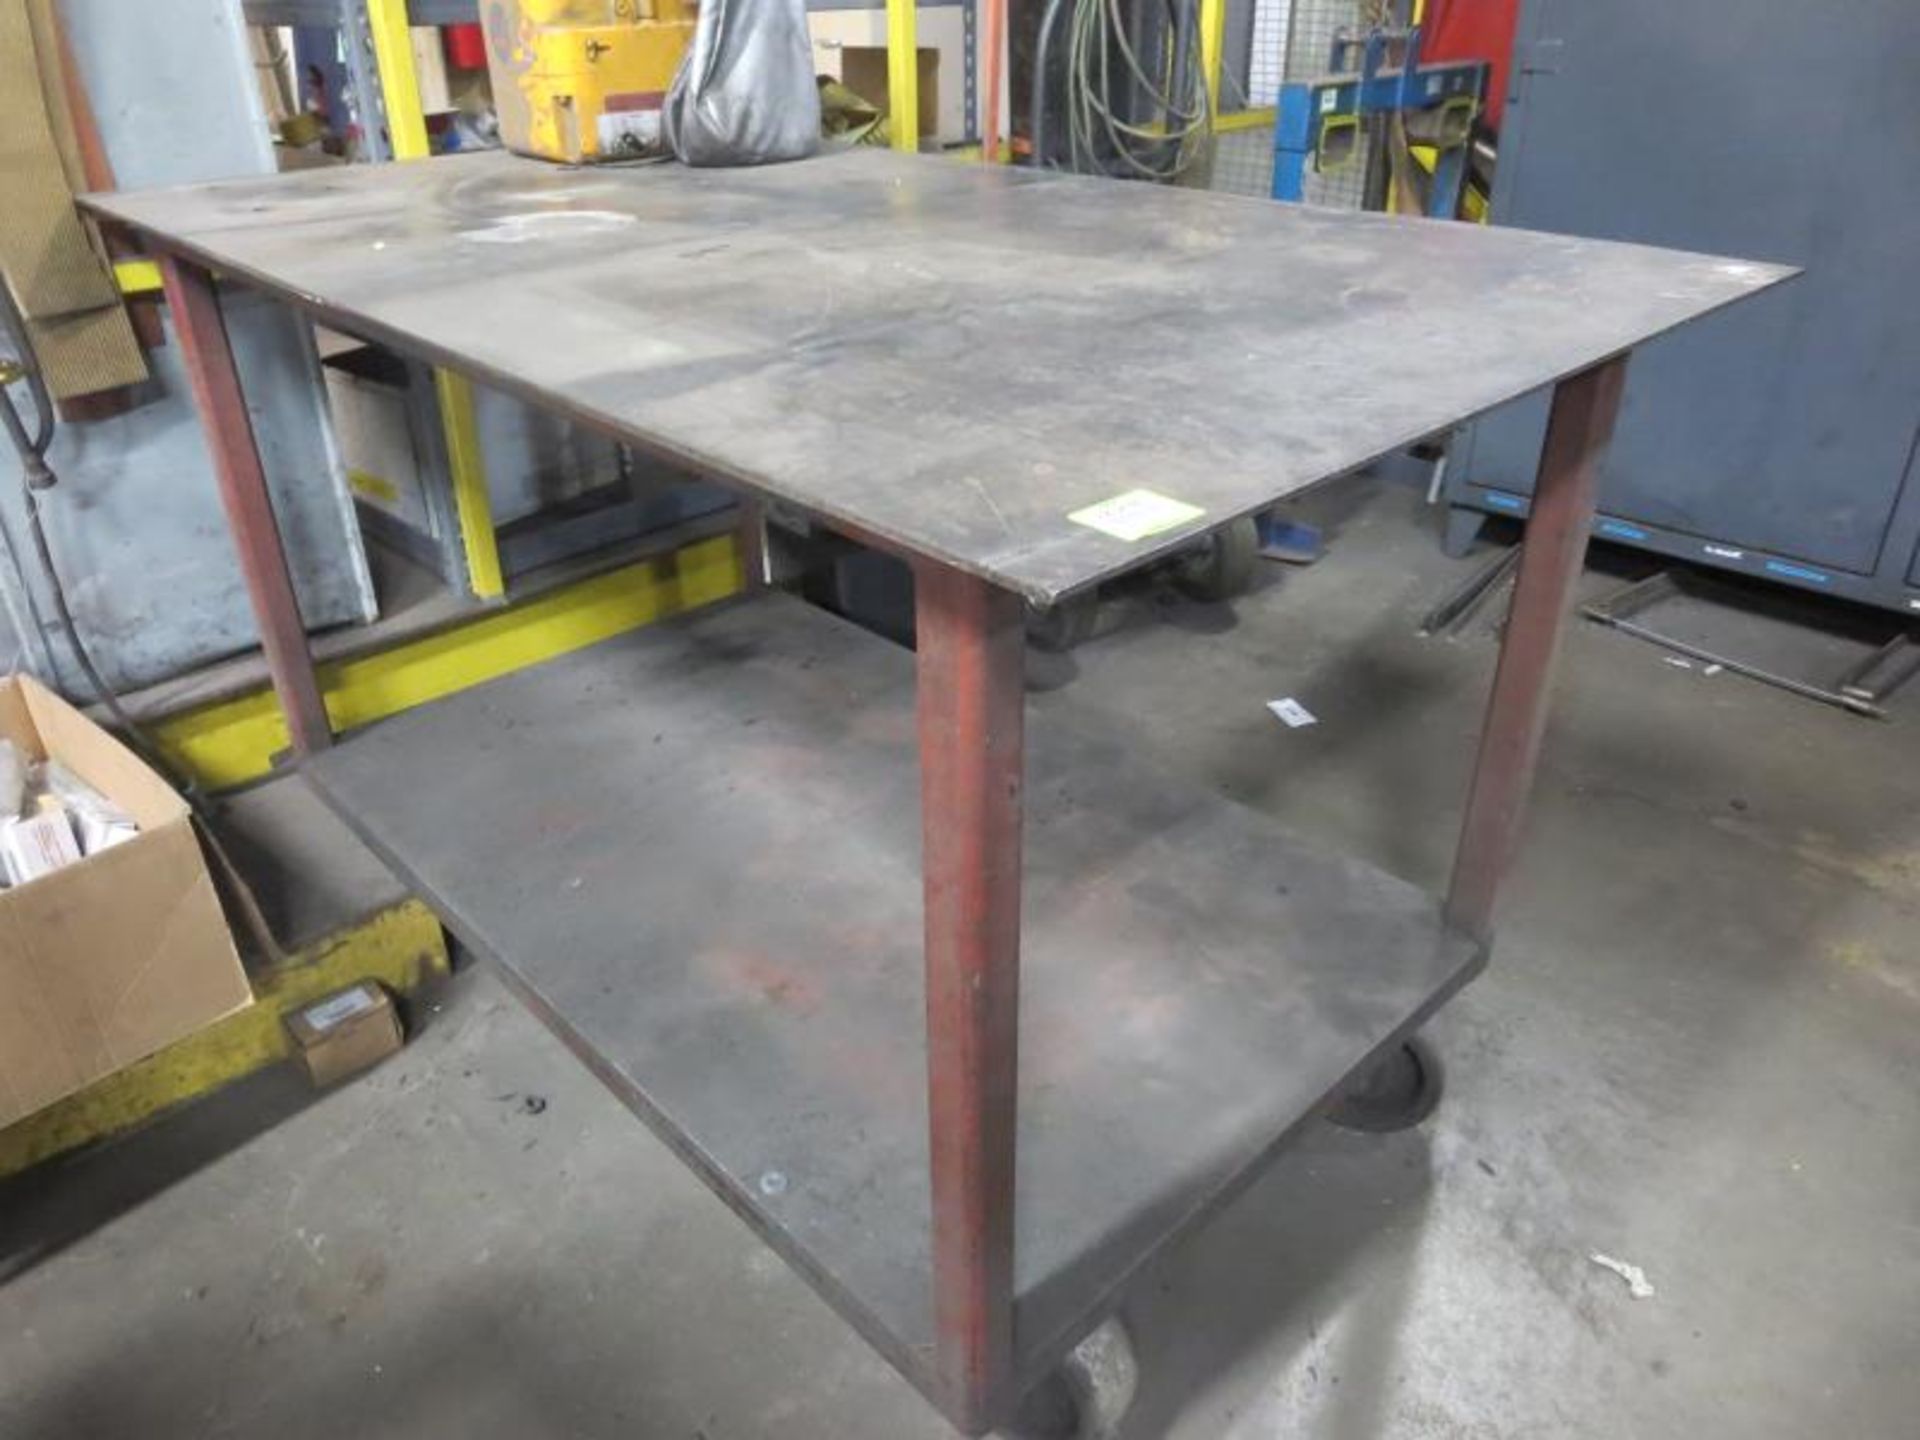 Work Bench, 64" x 38" x 40"h on casters, 1/4" steel top. Contents on top not included. Hit #